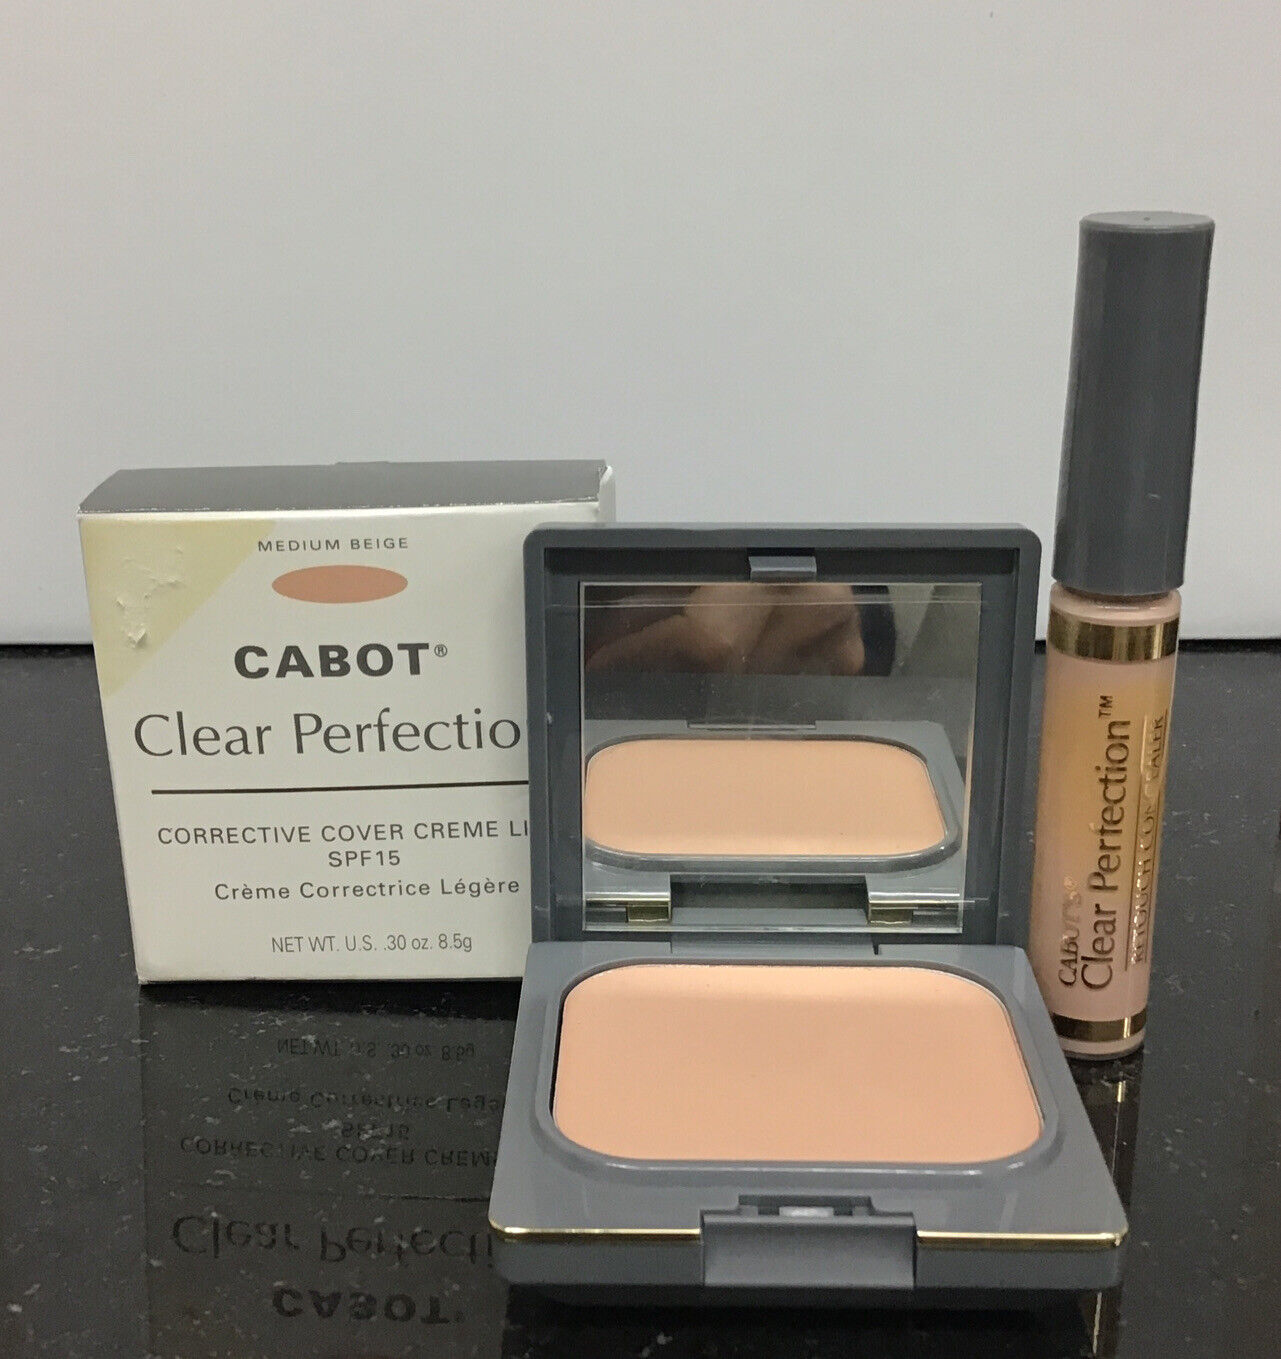 CABOT - Clear Perfection - Medium Beige - Corrective Cover Creme Lite - SPF15 